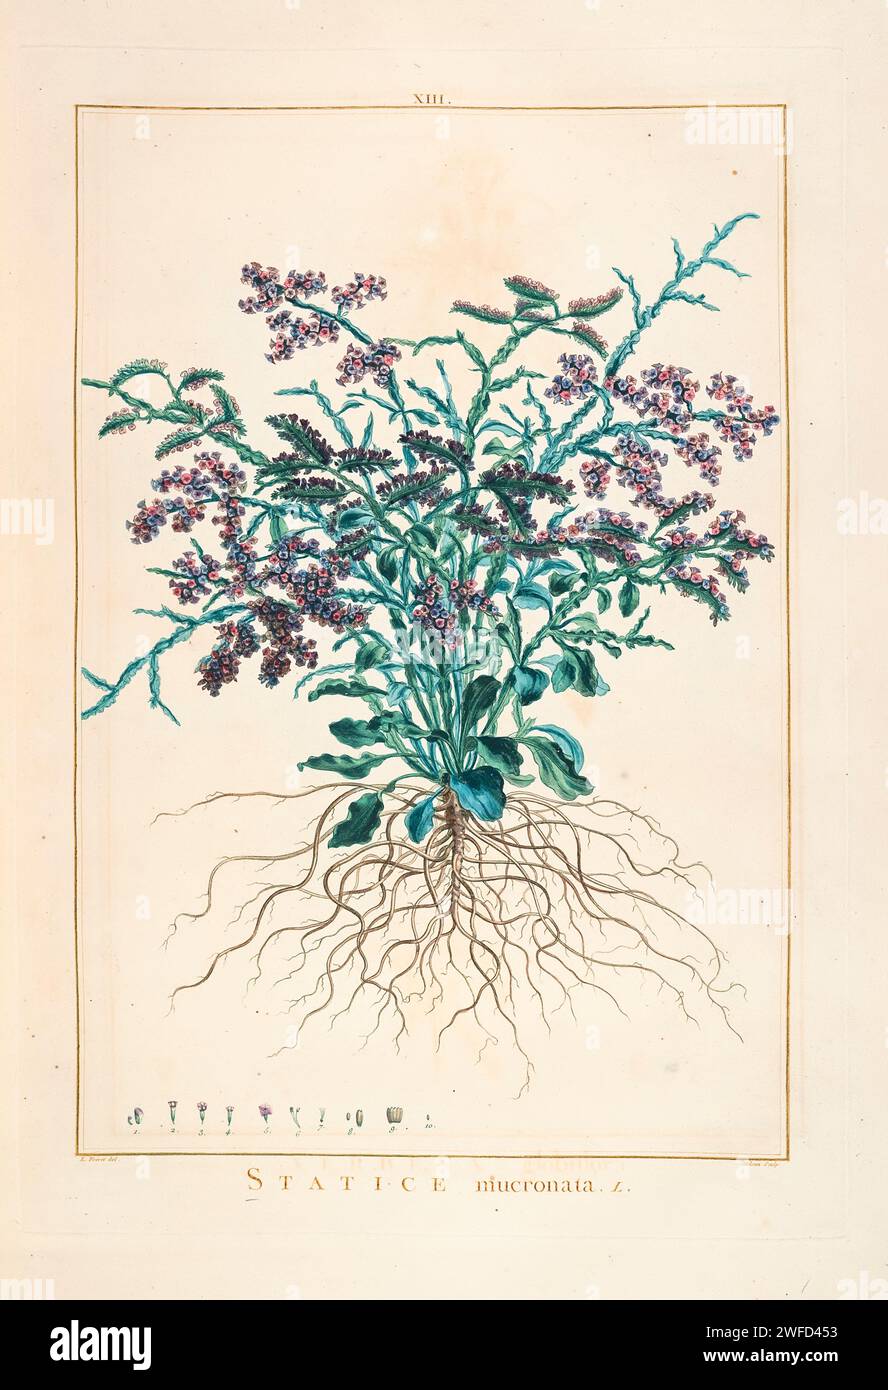 Statice mucronata Hand Painted by Pierre-Joseph Redouté in 1784 Stock Photo